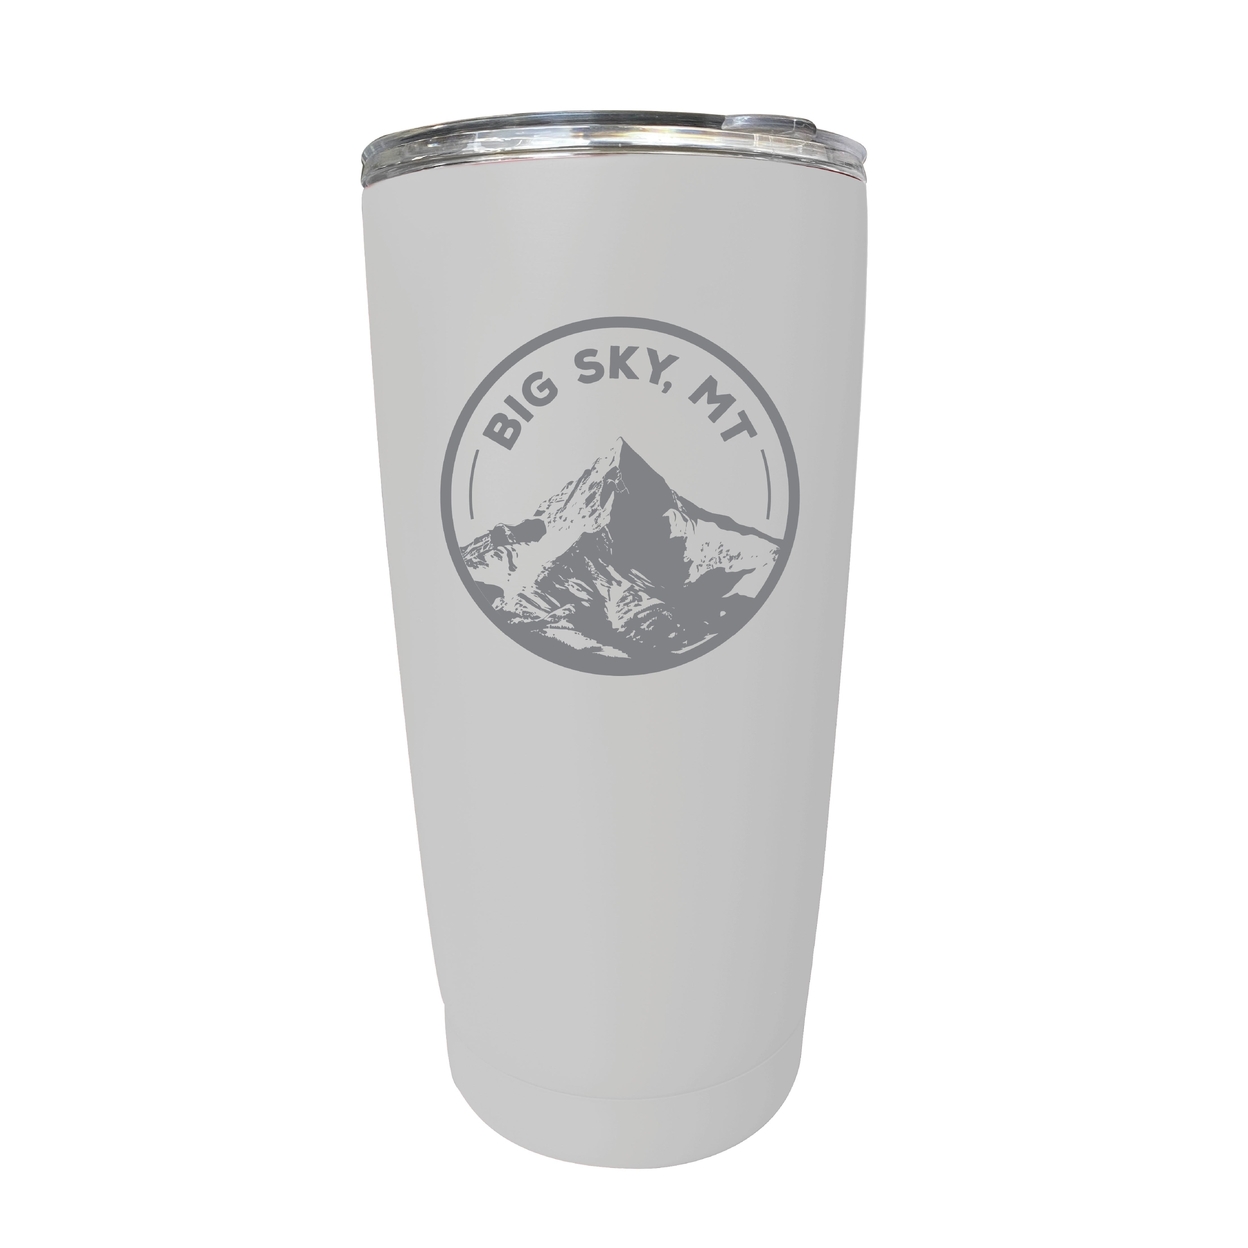 Big Sky Montana Souvenir 16 Oz Engraved Stainless Steel Insulated Tumbler - Red,,4-Pack